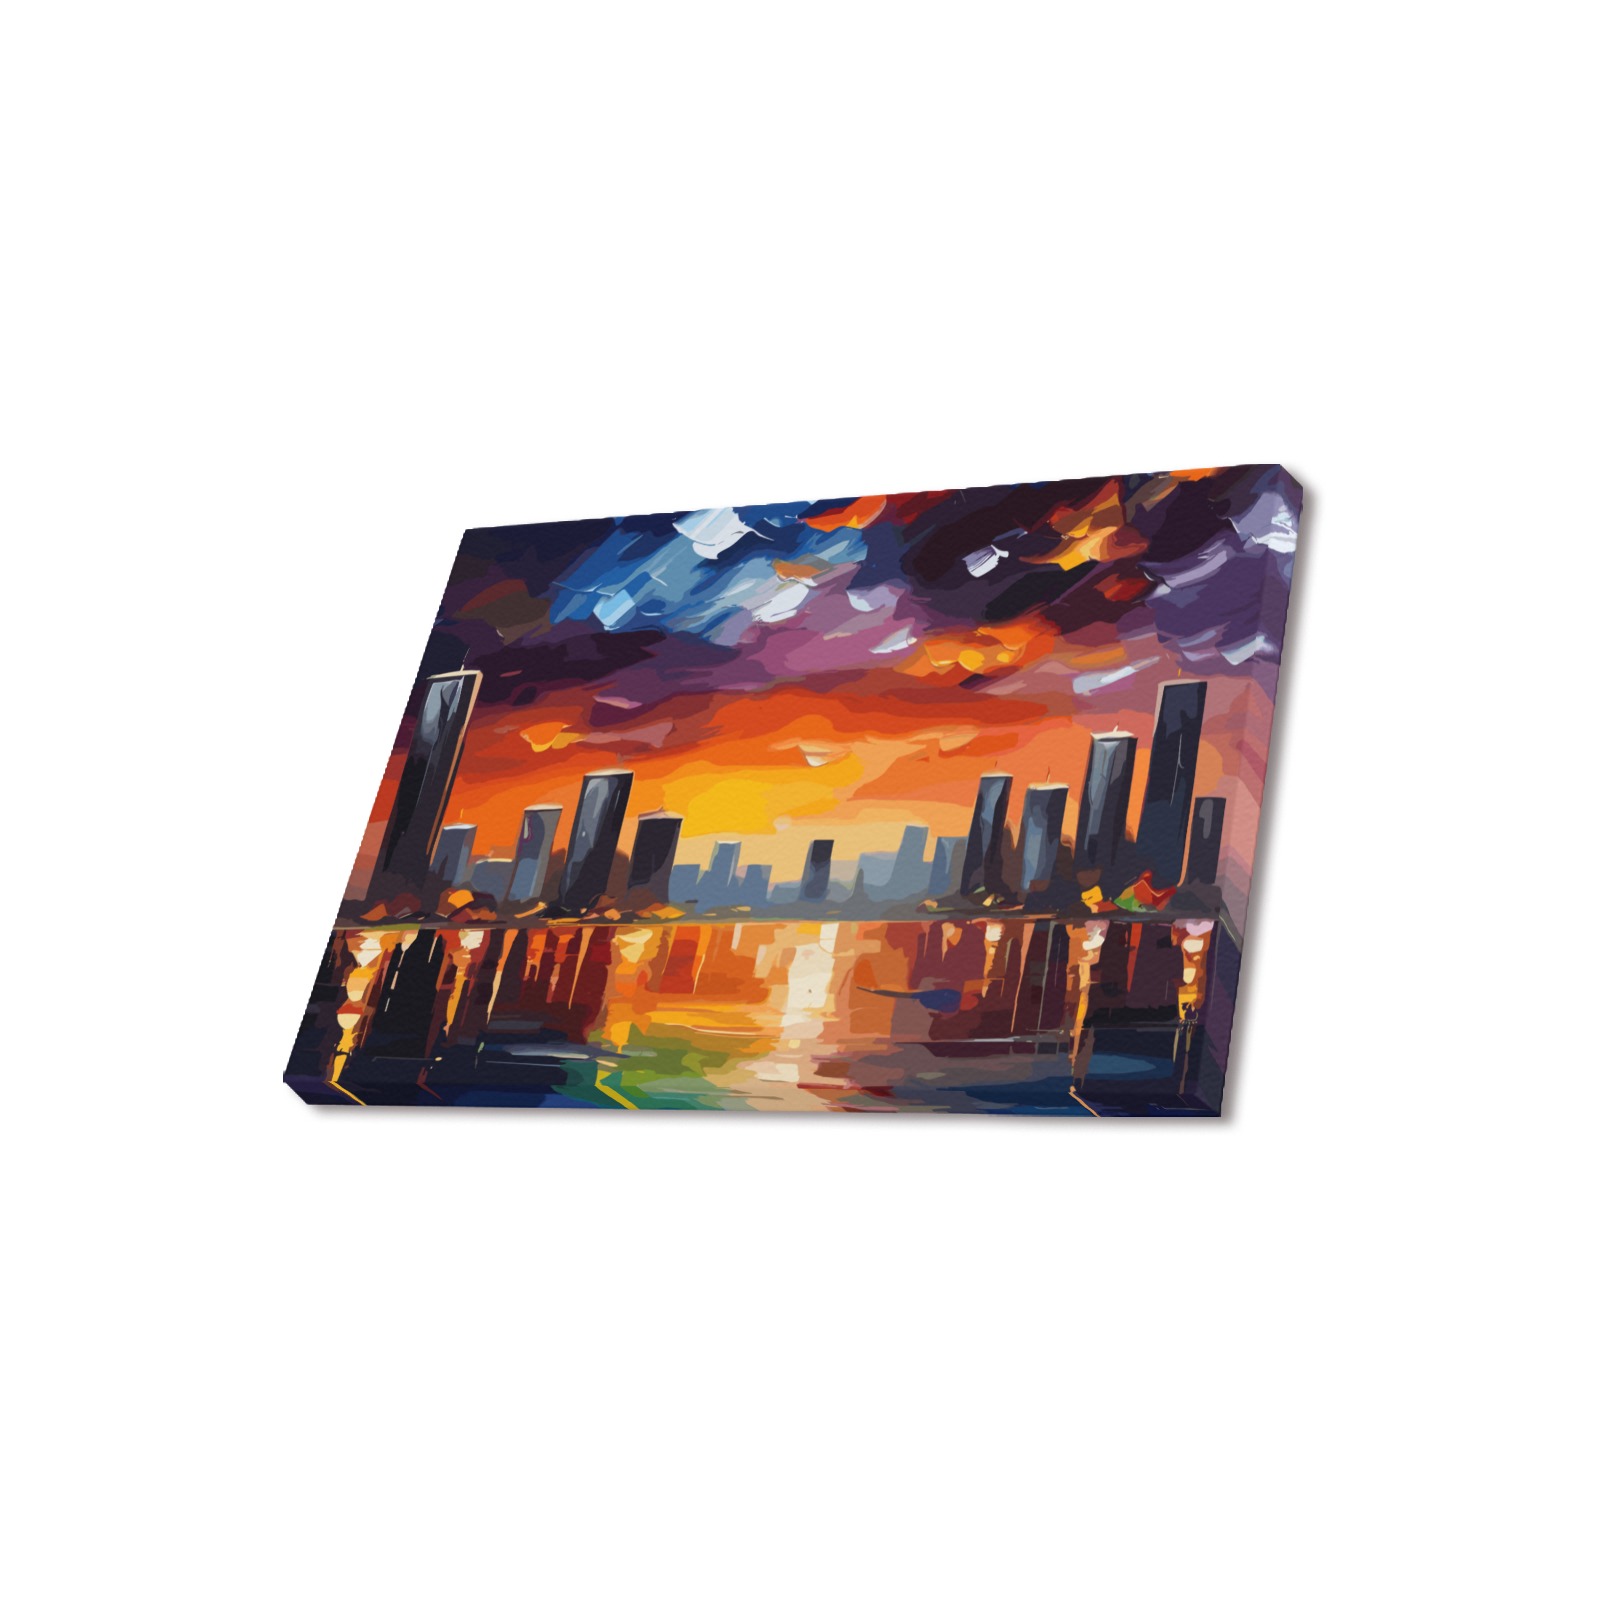 Fantasy megapolis by the sea. Dramatic sunset art. Upgraded Canvas Print 18"x12"